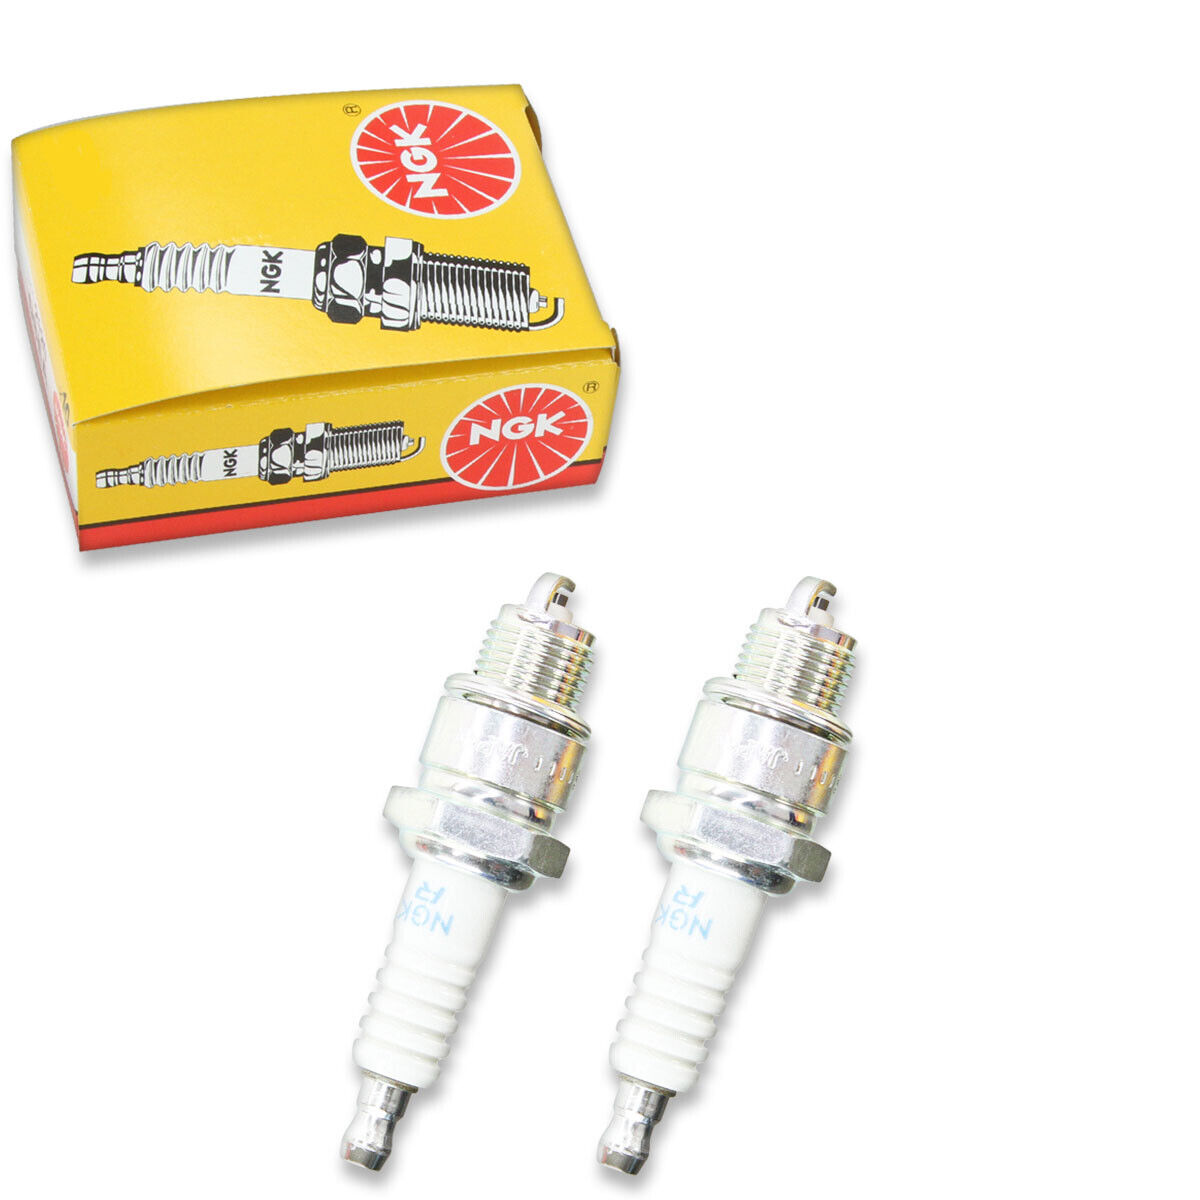 2 pc NGK 7022 BPR6HS Standard Spark Plugs for WR7BP WR7BC WR7B WR6BC fk